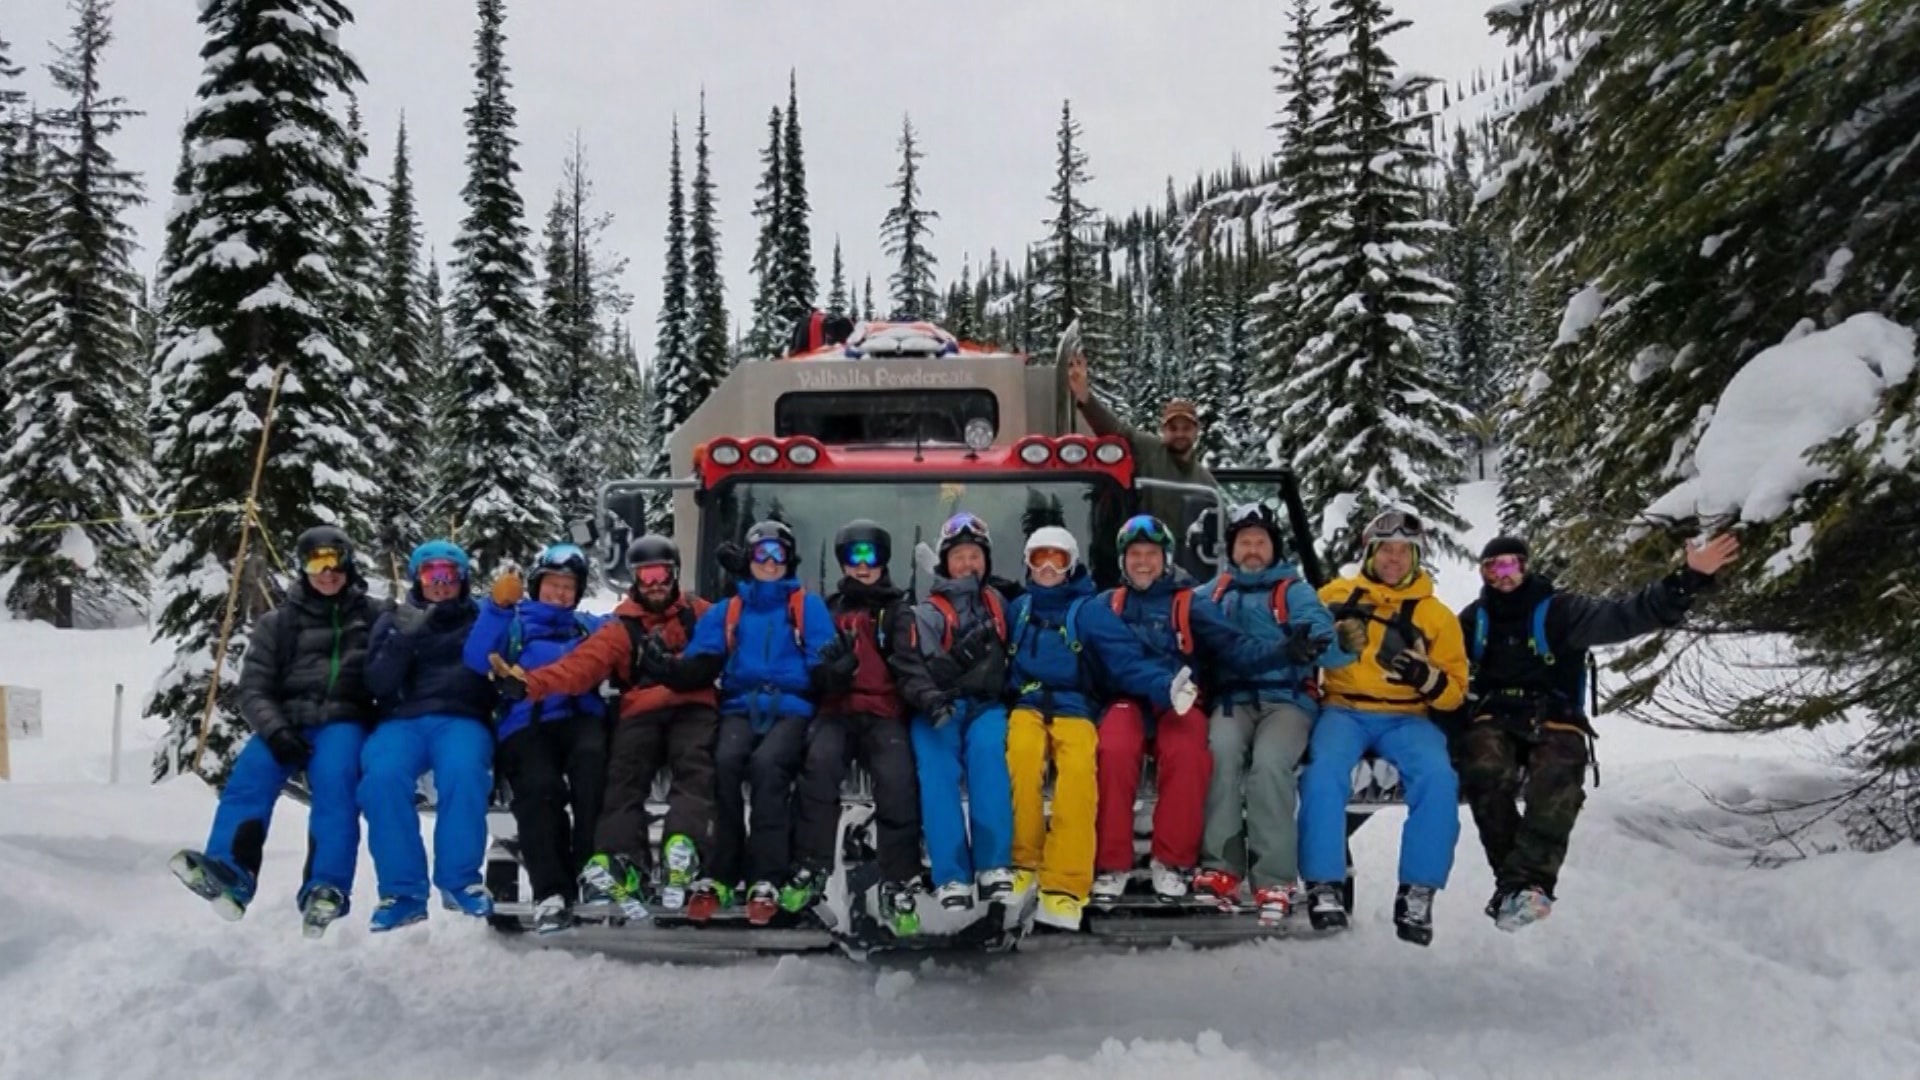 A dozen friends from Utah went to B.C. to do some CAT skiing and survived an avalanche. Credit: KSL.com